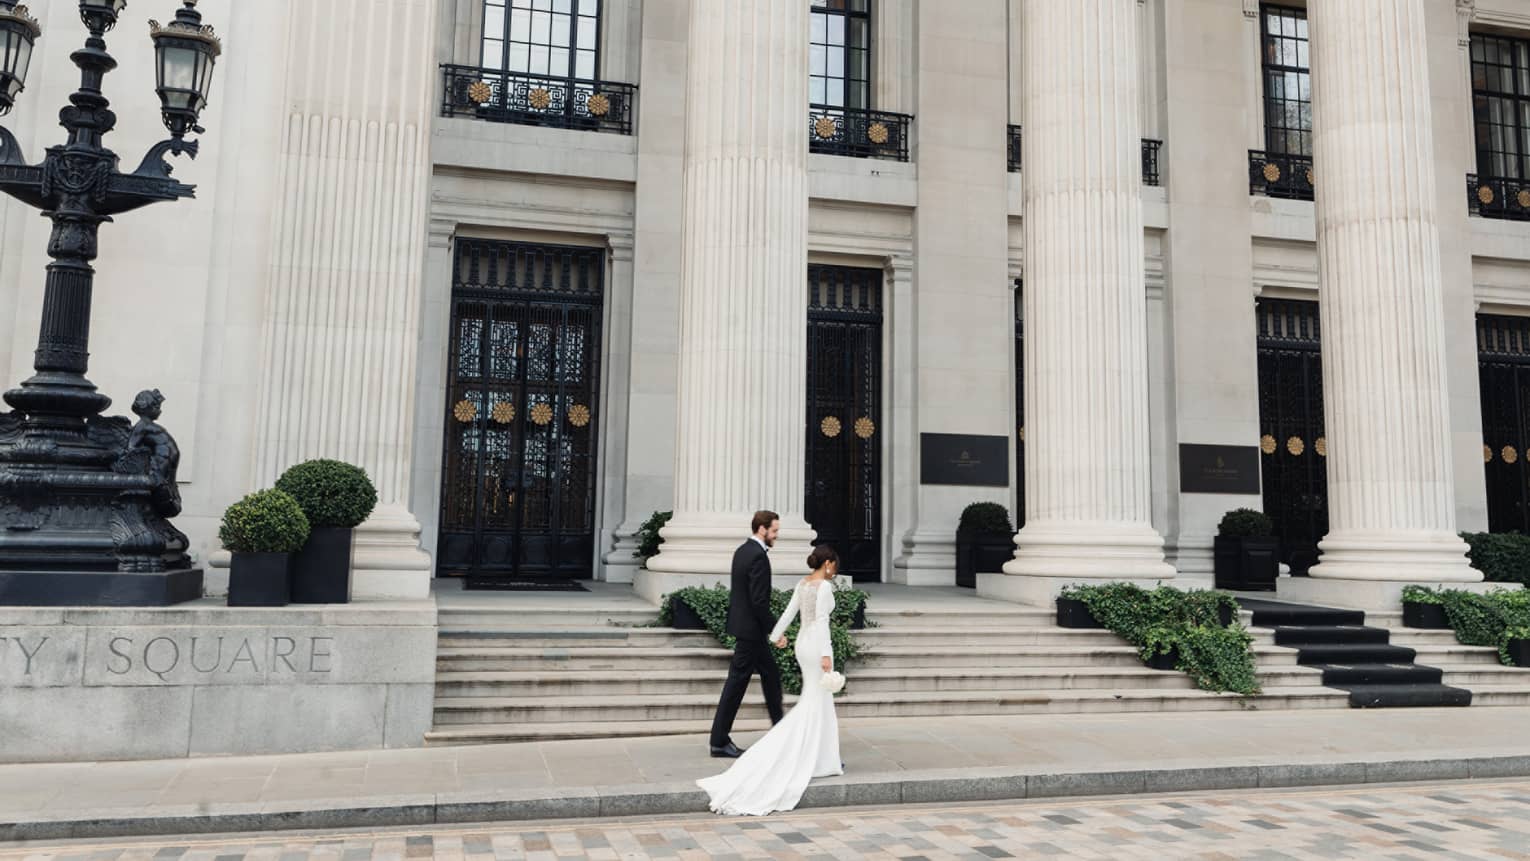 A bride and groom walking along a stone pathed street next to a large stone building with columns.